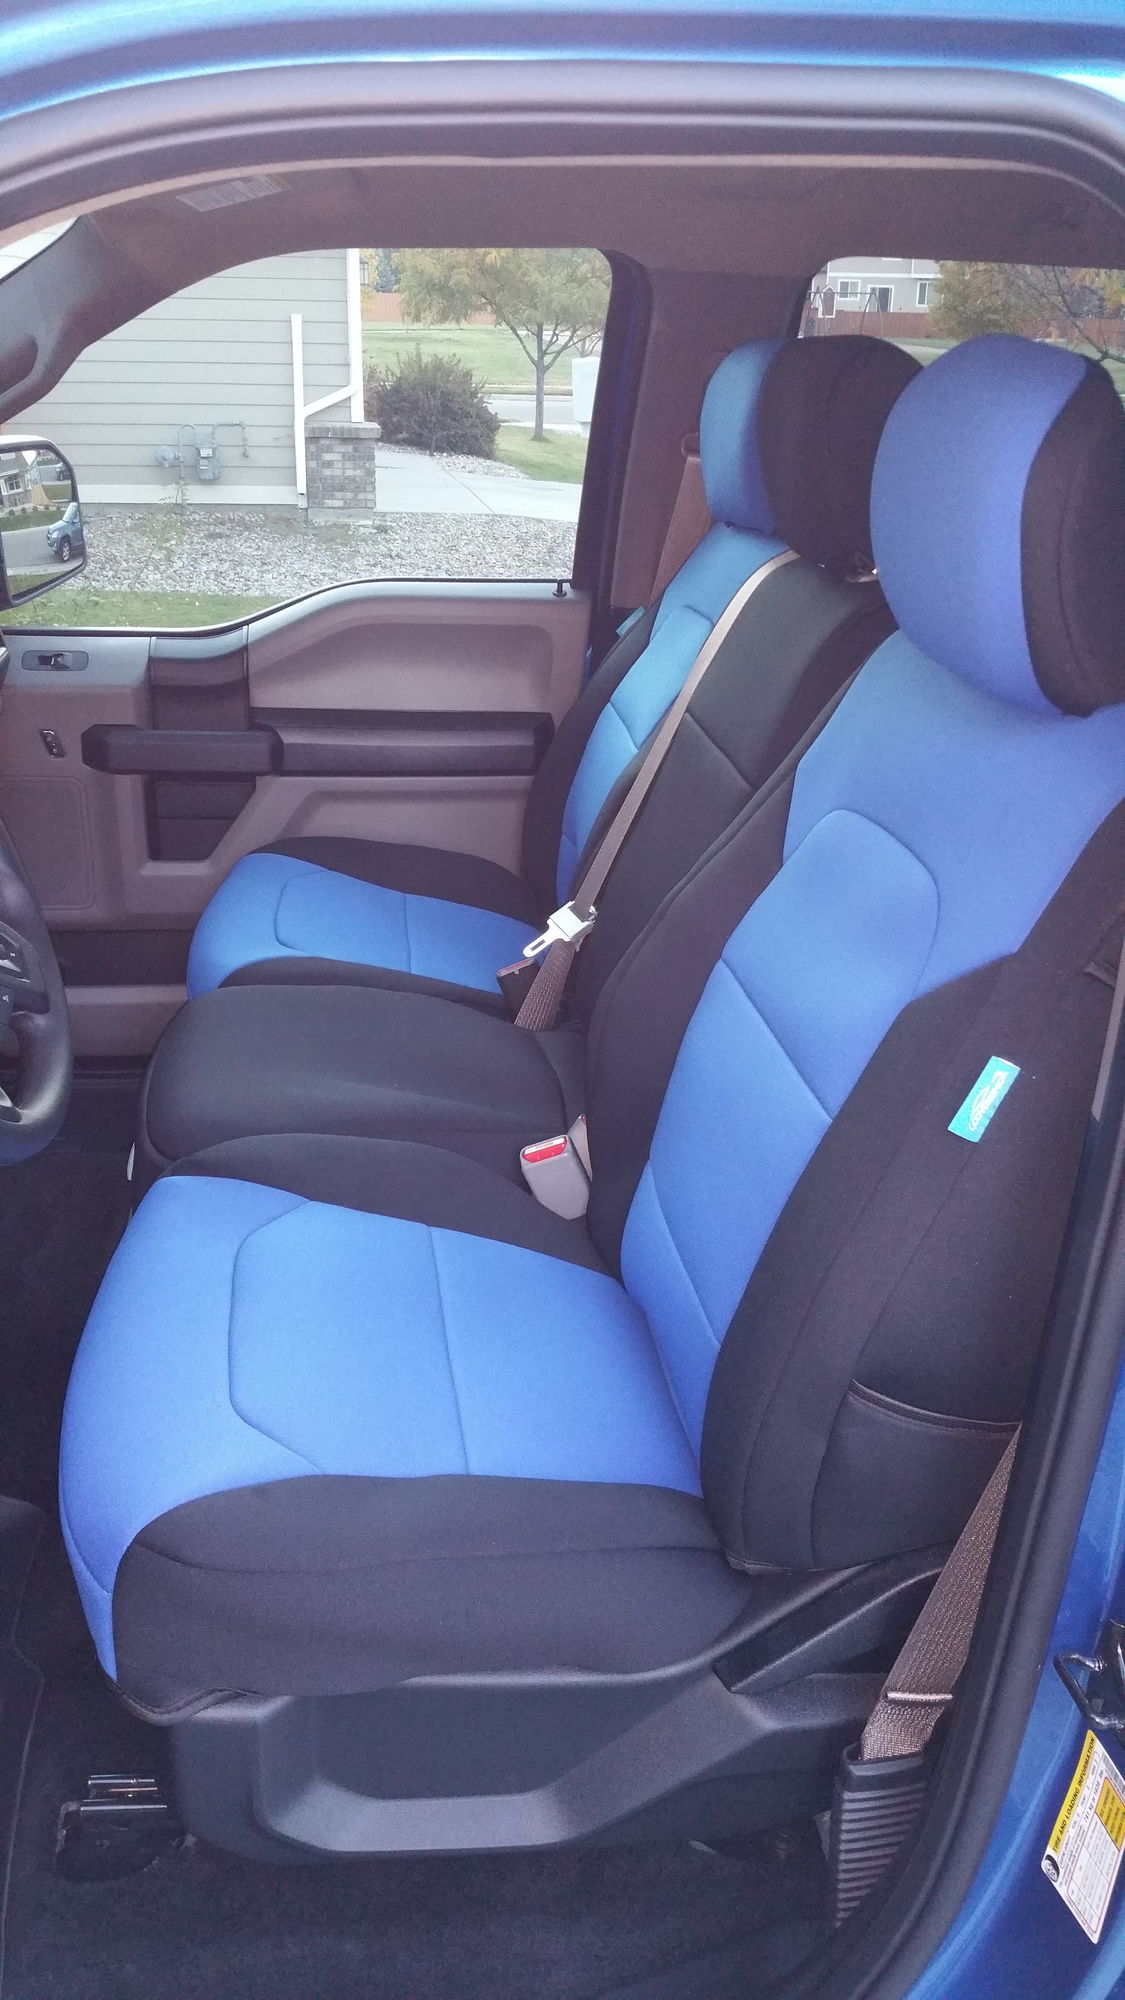 Worlds Best Seat Covers!! - Ford F150 Forum - Community of Ford Truck Fans